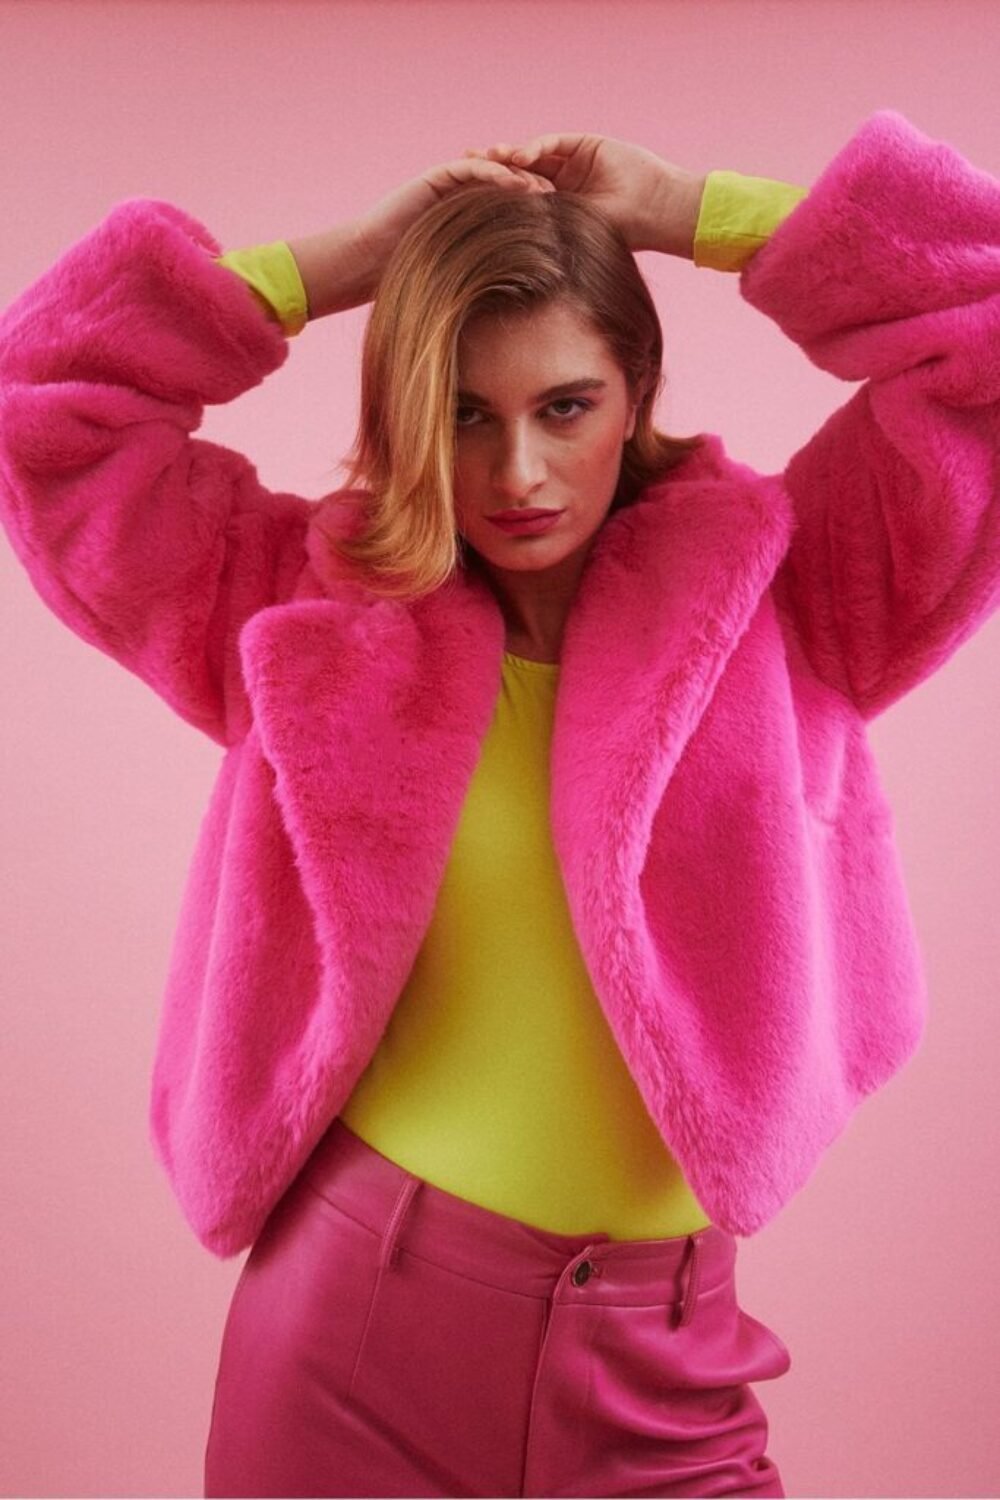 Shop Lux Pink Faux Fur Cropped Coat and women's luxury and designer clothes at www.lux-apparel.co.uk